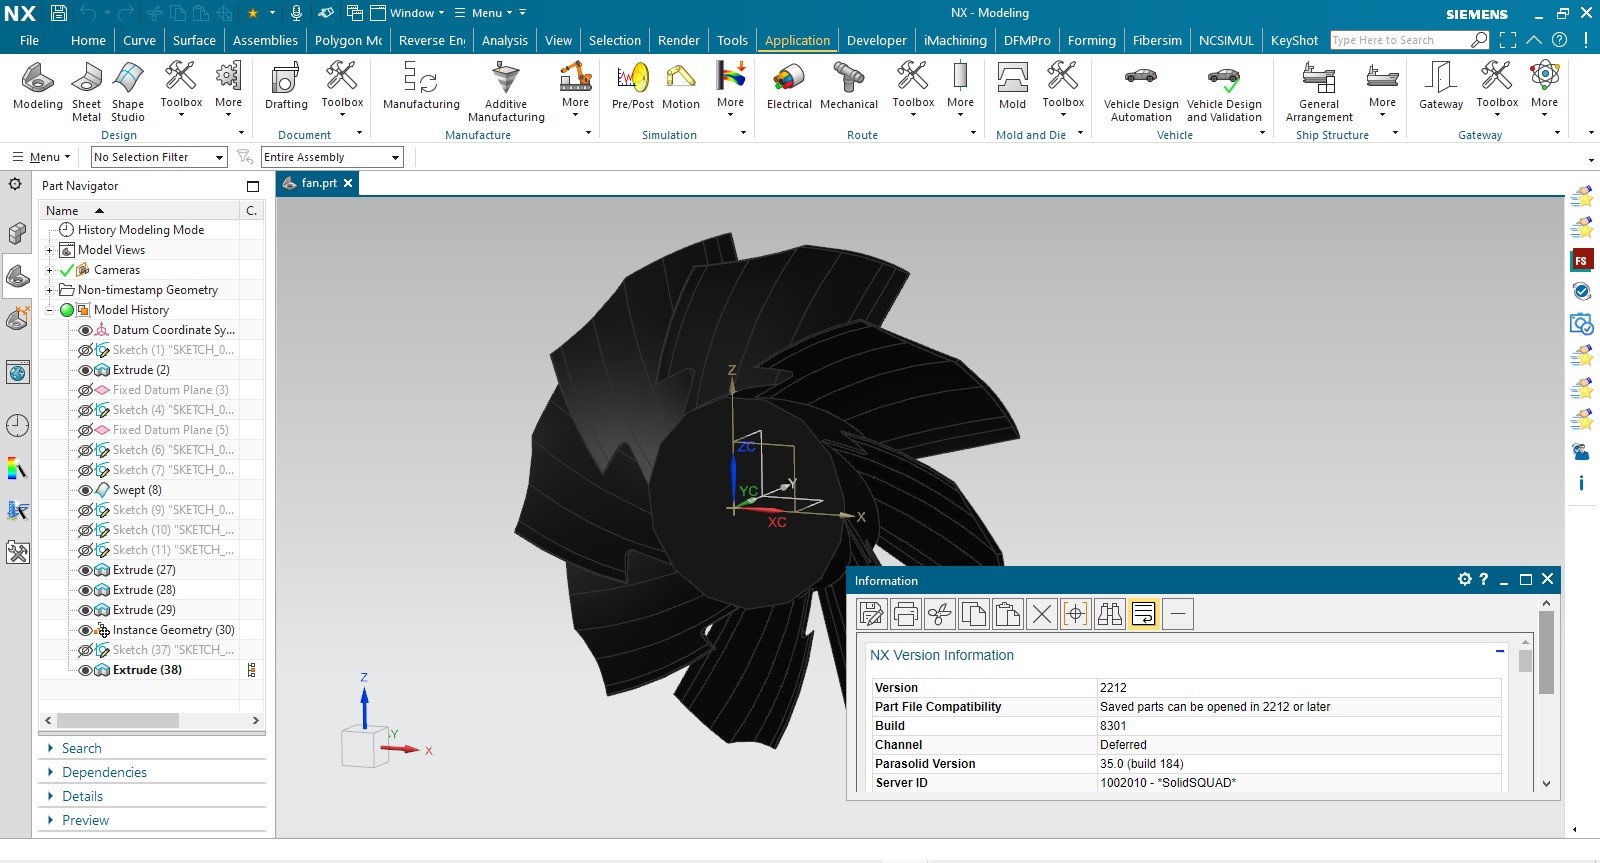 Working with Siemens NX 2212 Build 8301 full